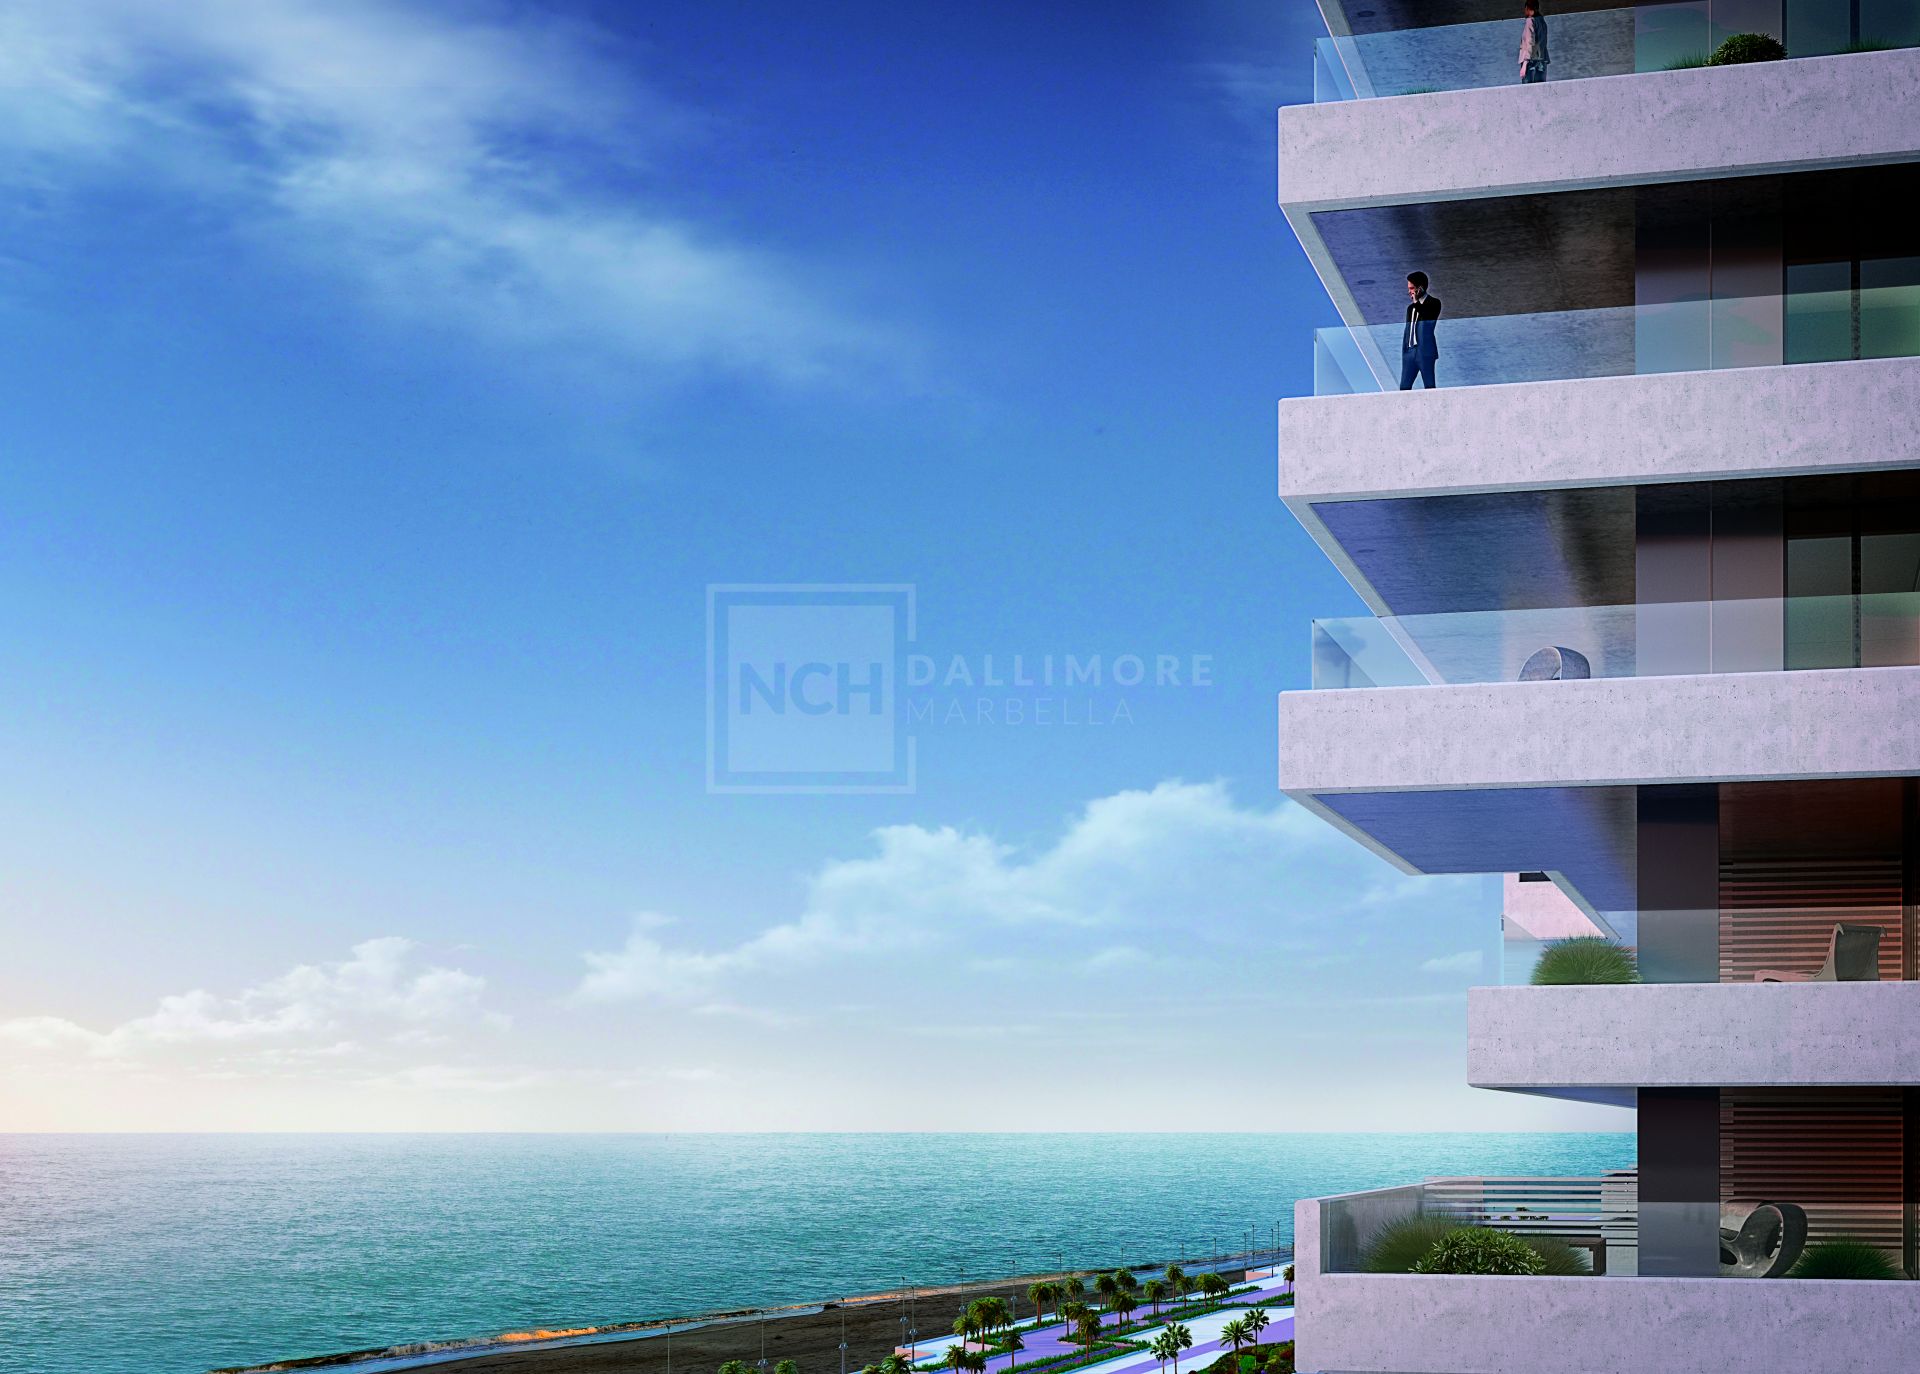 4 BEDROOM APARTMENT WITH STUNNING SEA VIEWS ON THE 18TH FLOOR